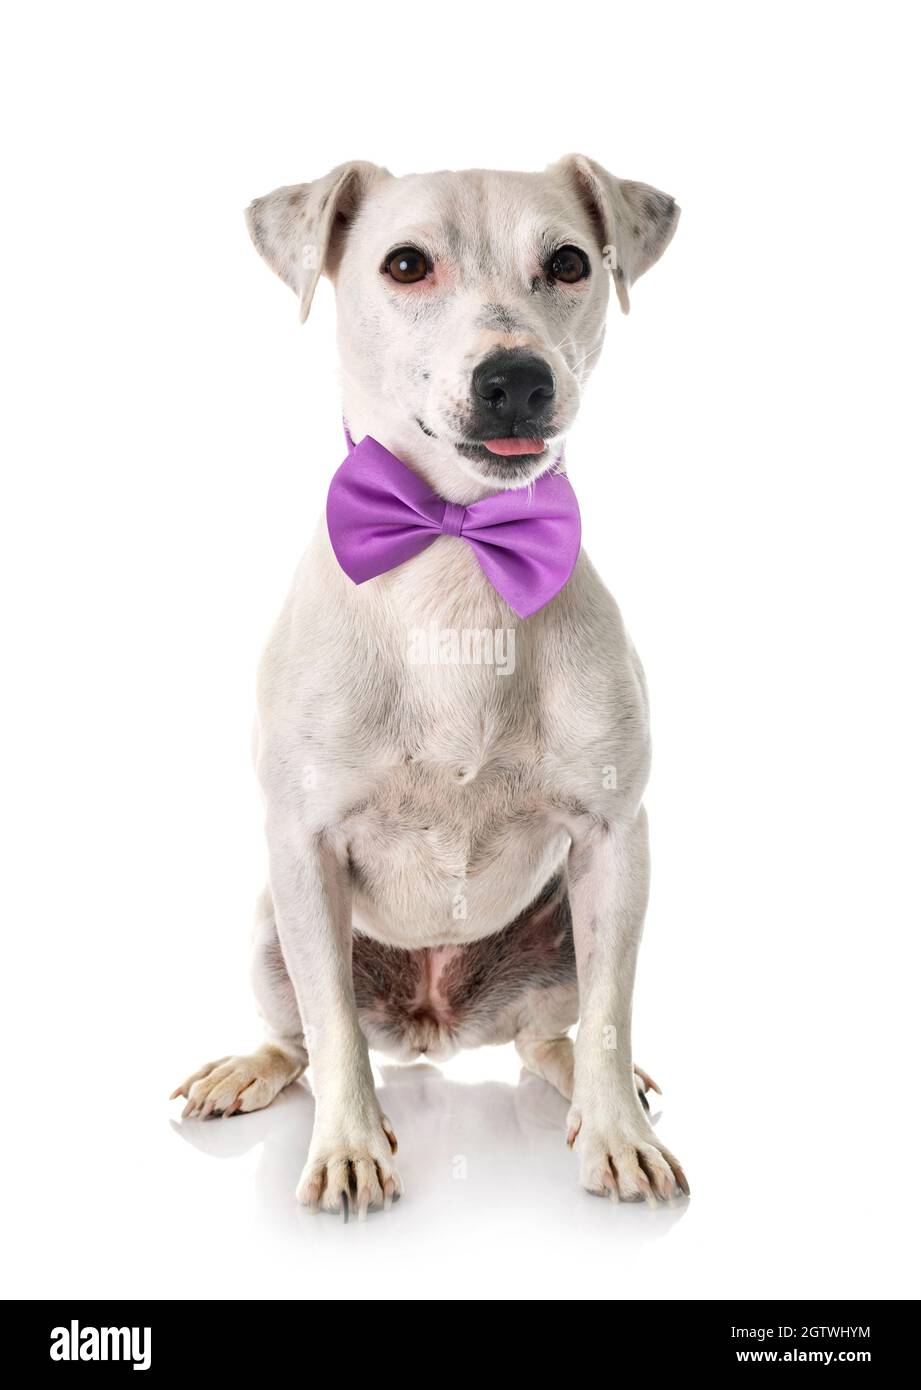 Close-up Of Dog Wearing Bow Tie Against White Background Stock Photo